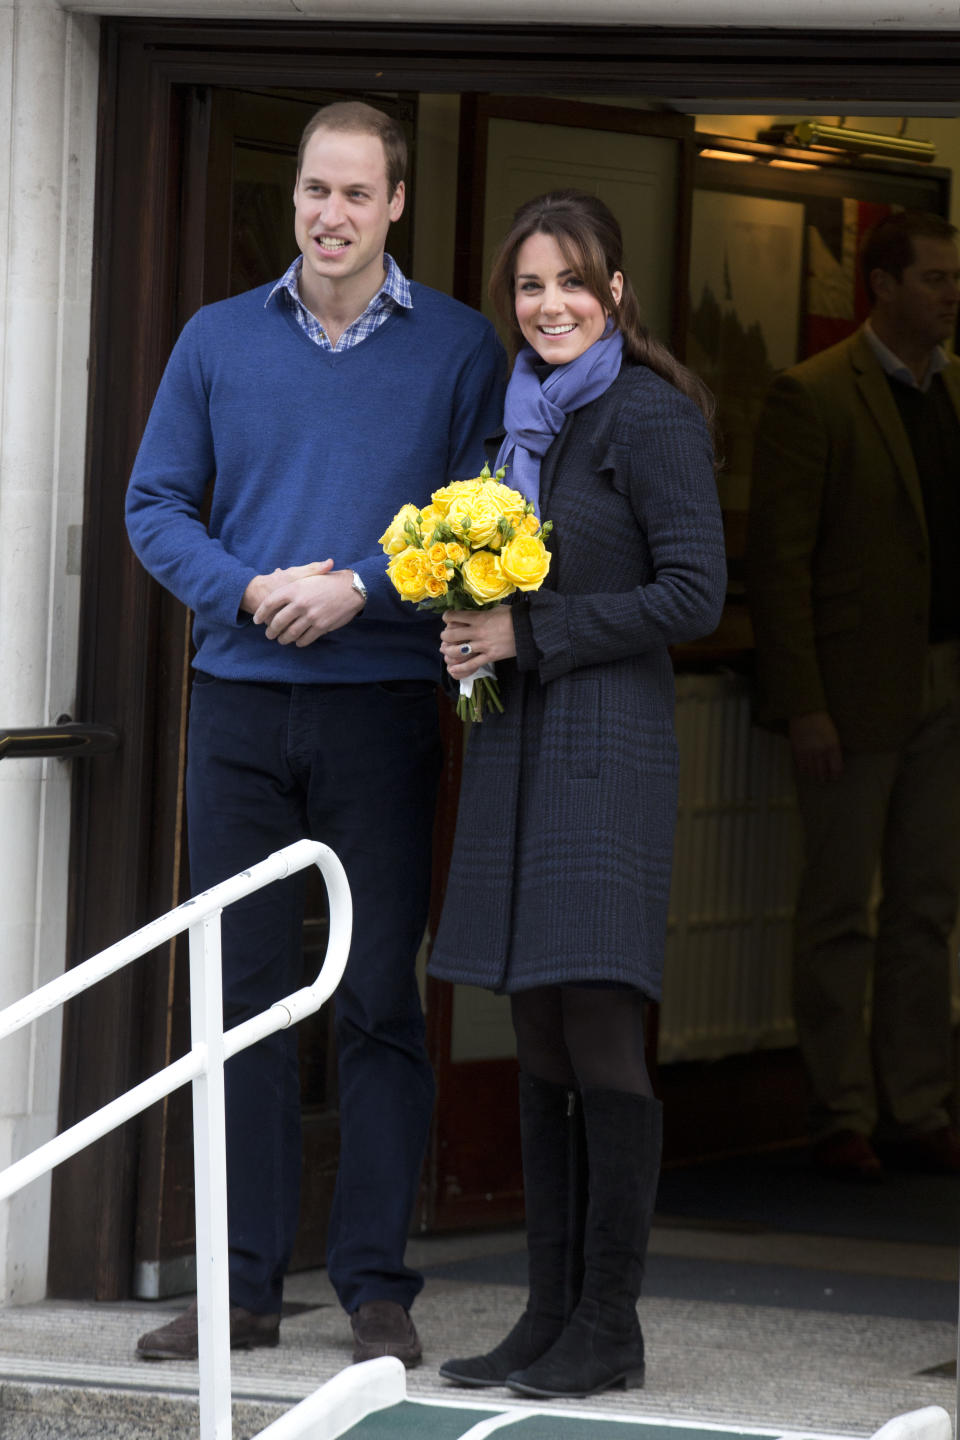 LONDON, ENGLAND - DECEMBER 06:  Catherine, Duchess of Cambridge and Prince William, Duke of Cambridge leave the King Edward VII hospital where she has been treated for hyperemesis gravidarum, extreme morning sickness at King Edward VII Hospital on December 6, 2012 in London, England.  (Photo by Julian Parker/UK Press via Getty Images)